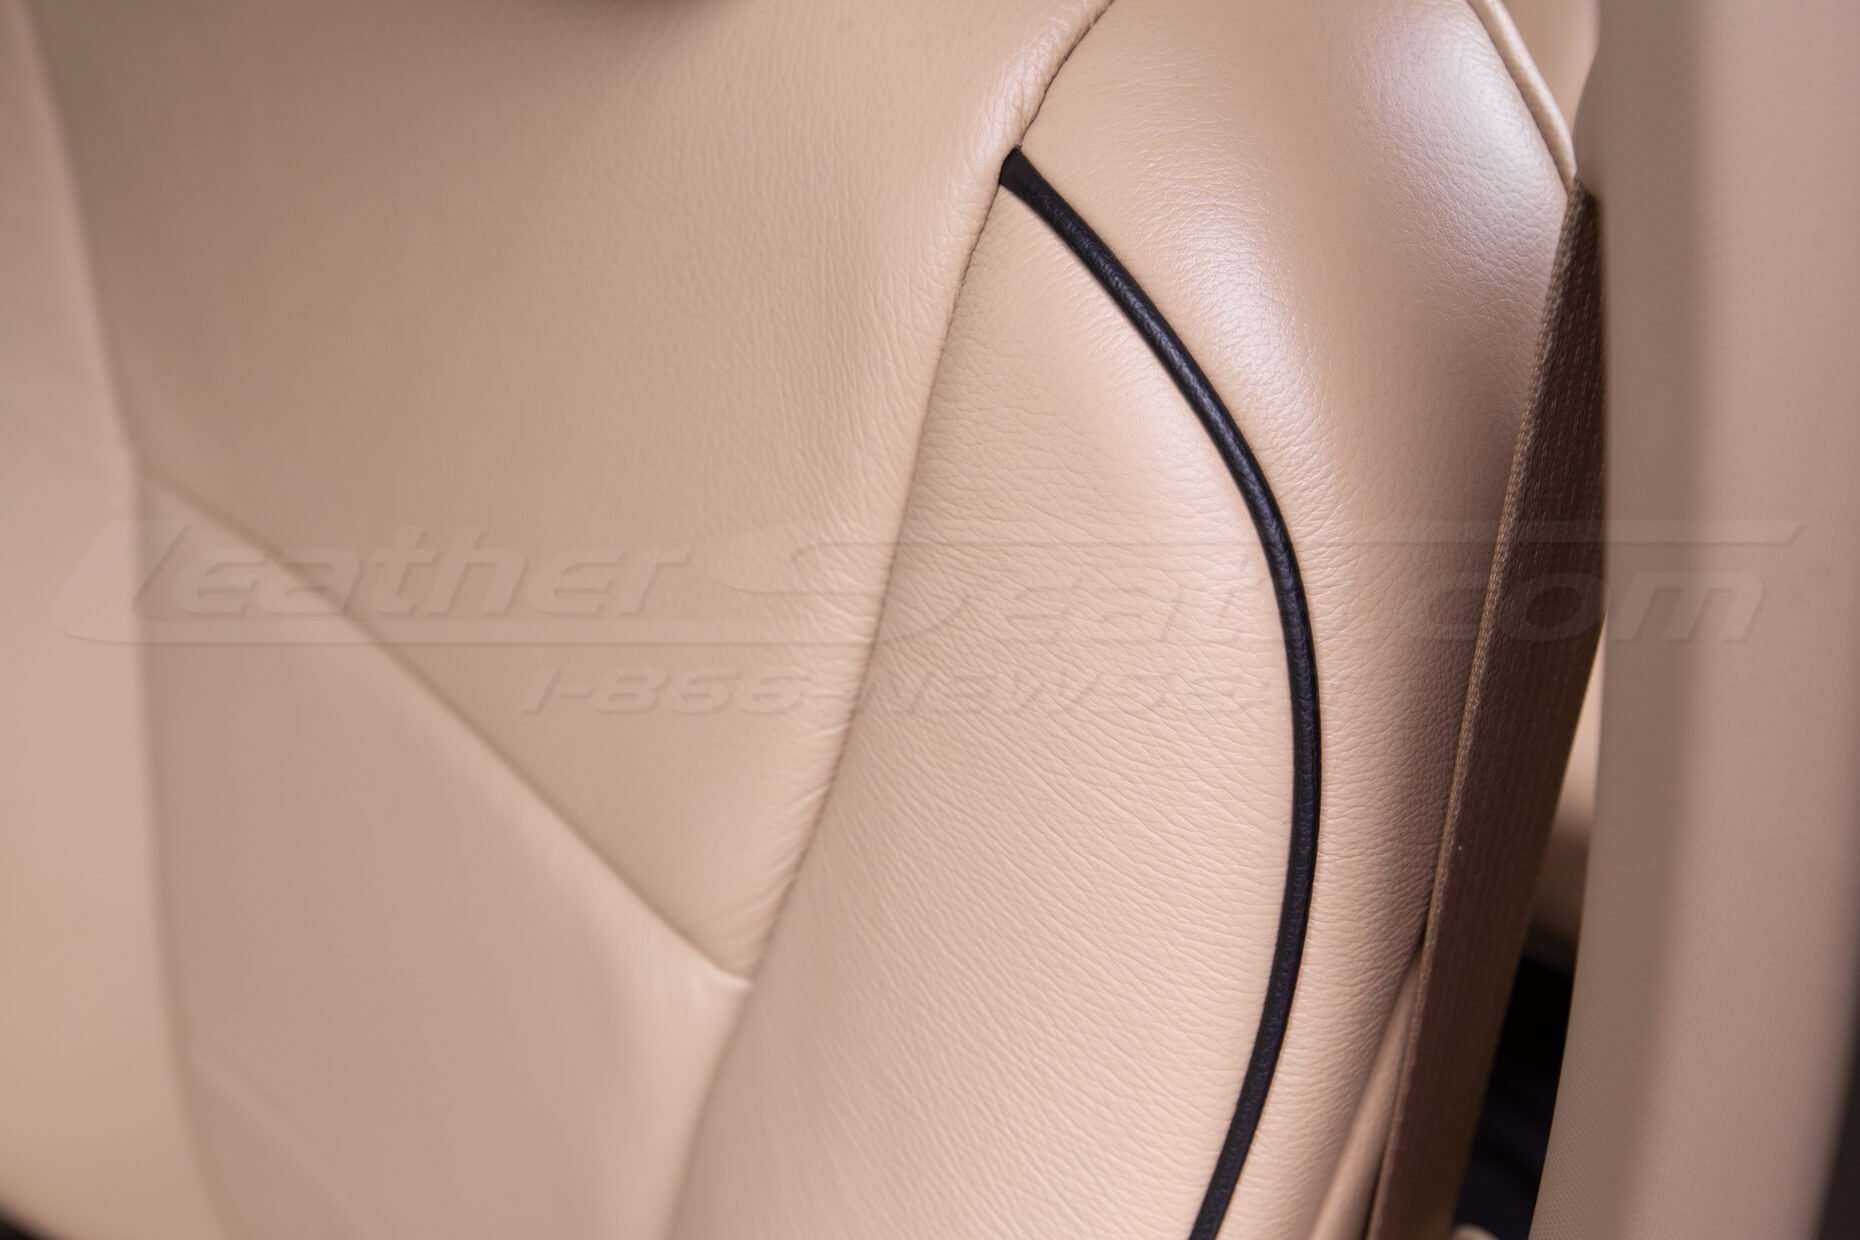 Ford Superduty Leather Seats - Bisque - Piping close-up